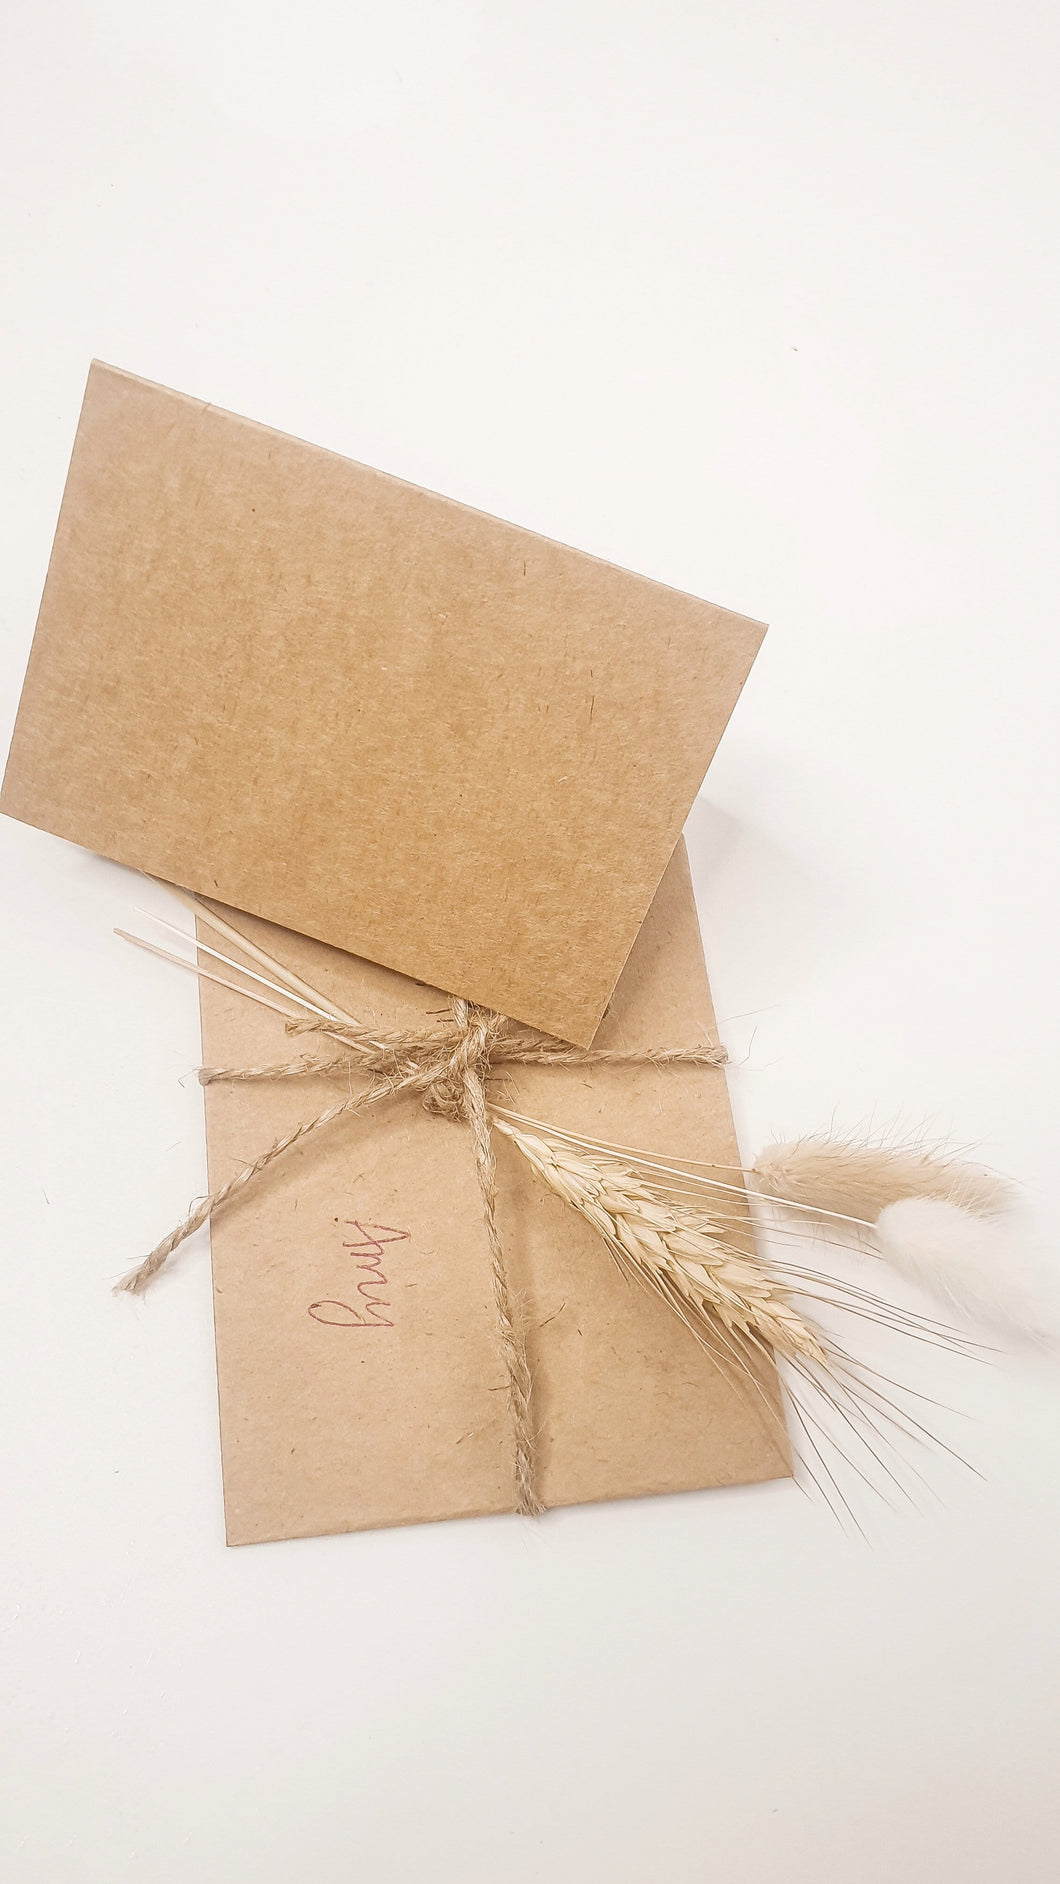 Card with message and envelope- including mini dried floral arrangement attached.